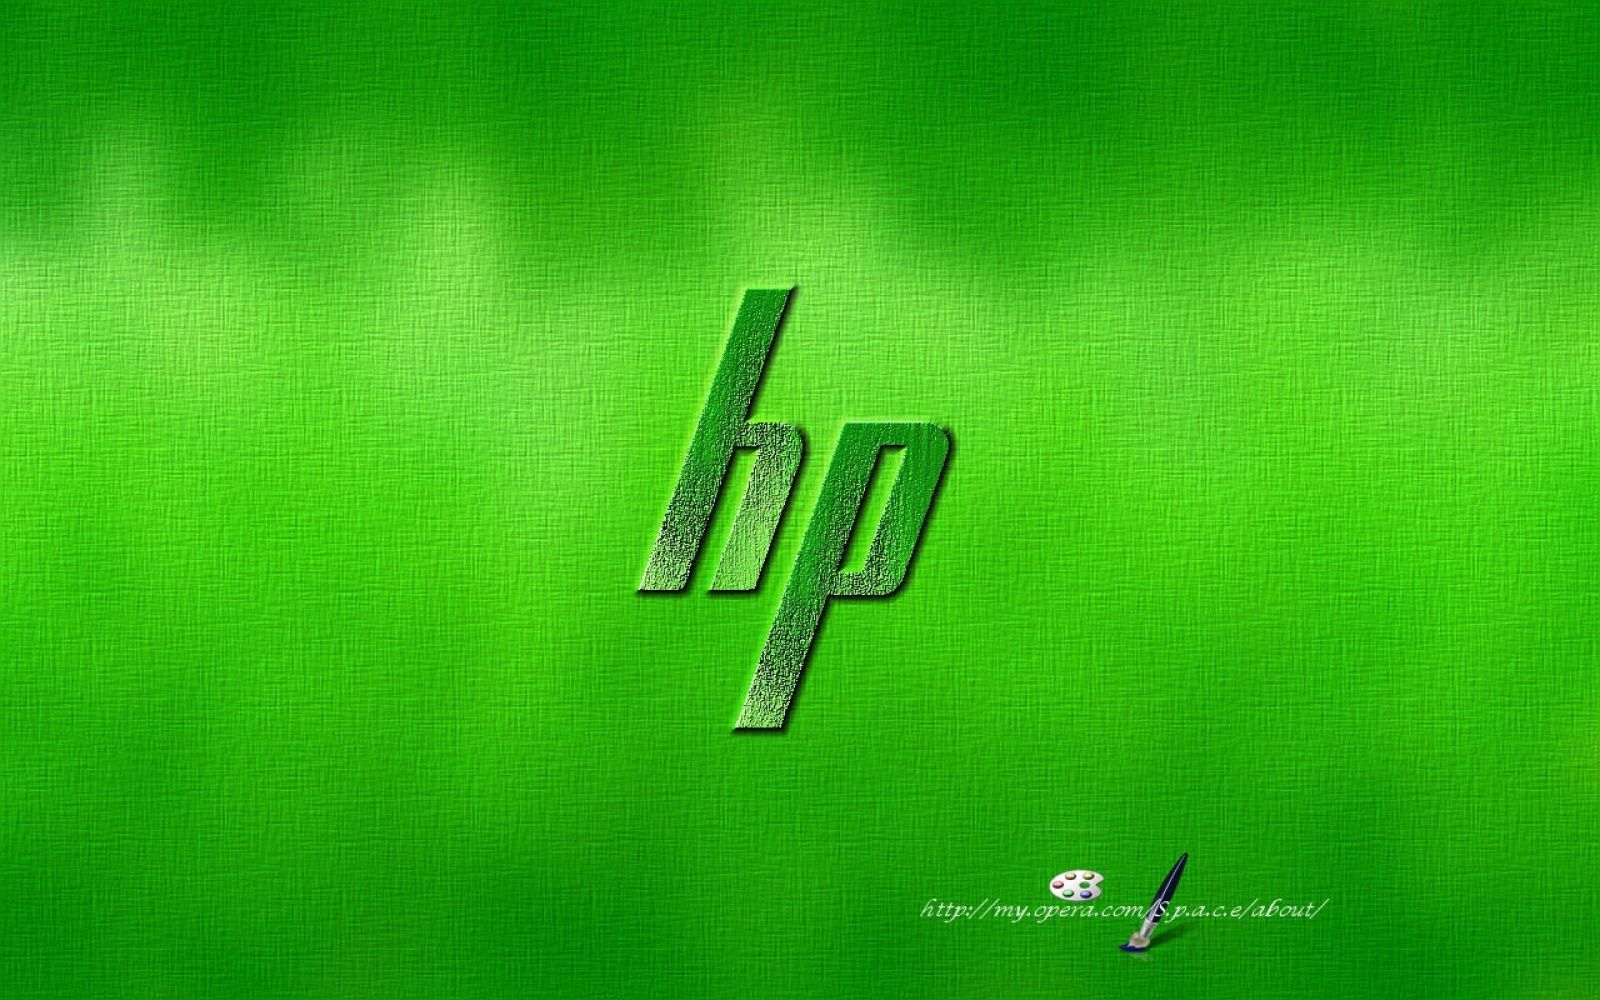 HP Sign Wallpaper. HP Wallpaper, Wallpaper HP Laptop and HP Steam Wallpaper